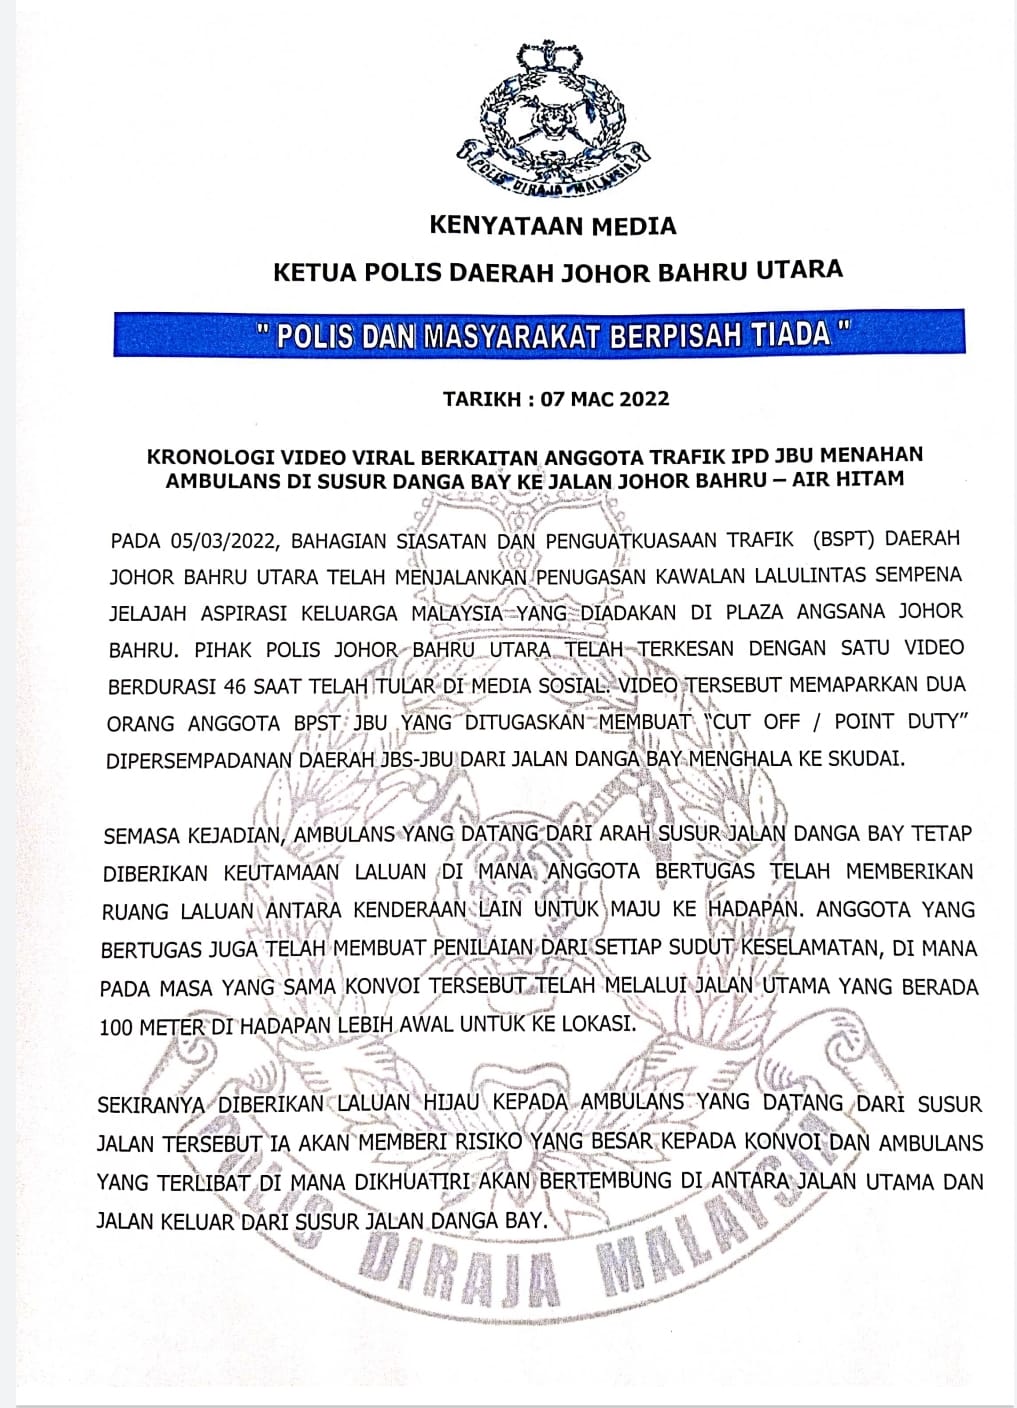 The Northern Johor Bahru Police Department explains that the likelihood of an accident would have been high if the ambulance was allowed to pass. Source: Polis Daerah Johor Bahru Utara